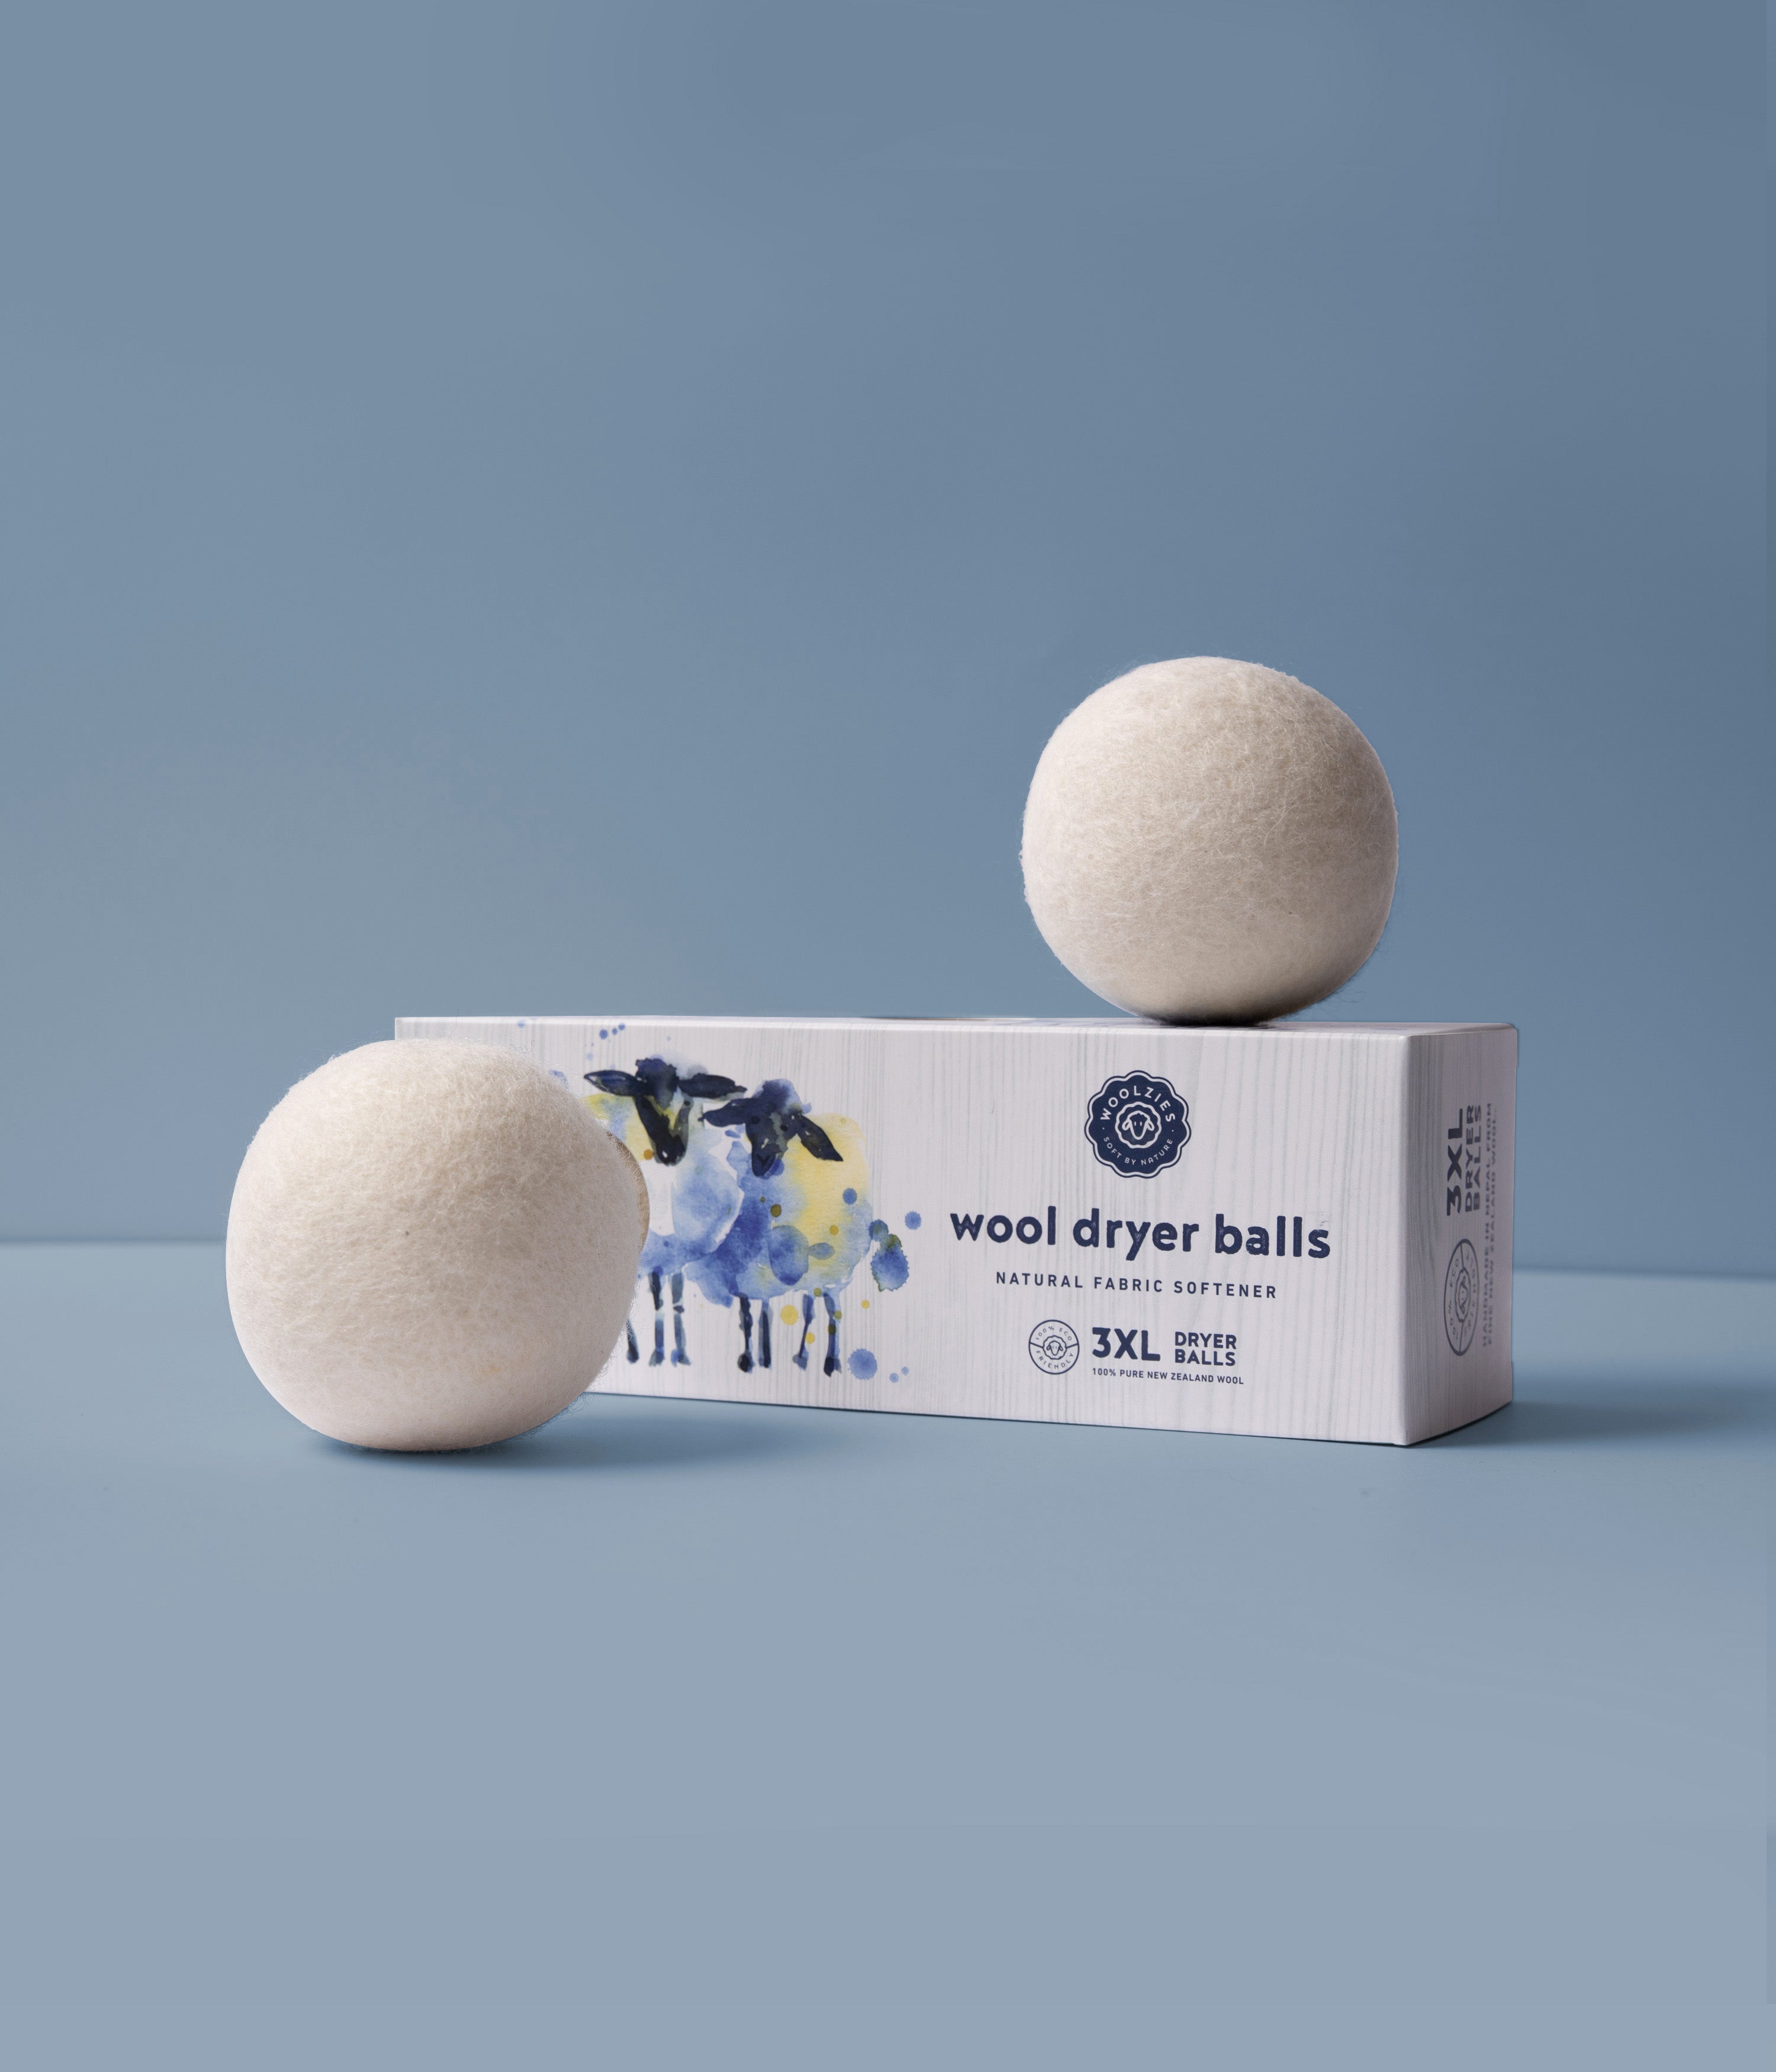 Woolzies Organic Wool Dryer Balls: 3 Pack XL Dryer Balls & 100% Pure  Lavender Essential Oil | All Natural Laundry Fabric Softener Balls | Made  with